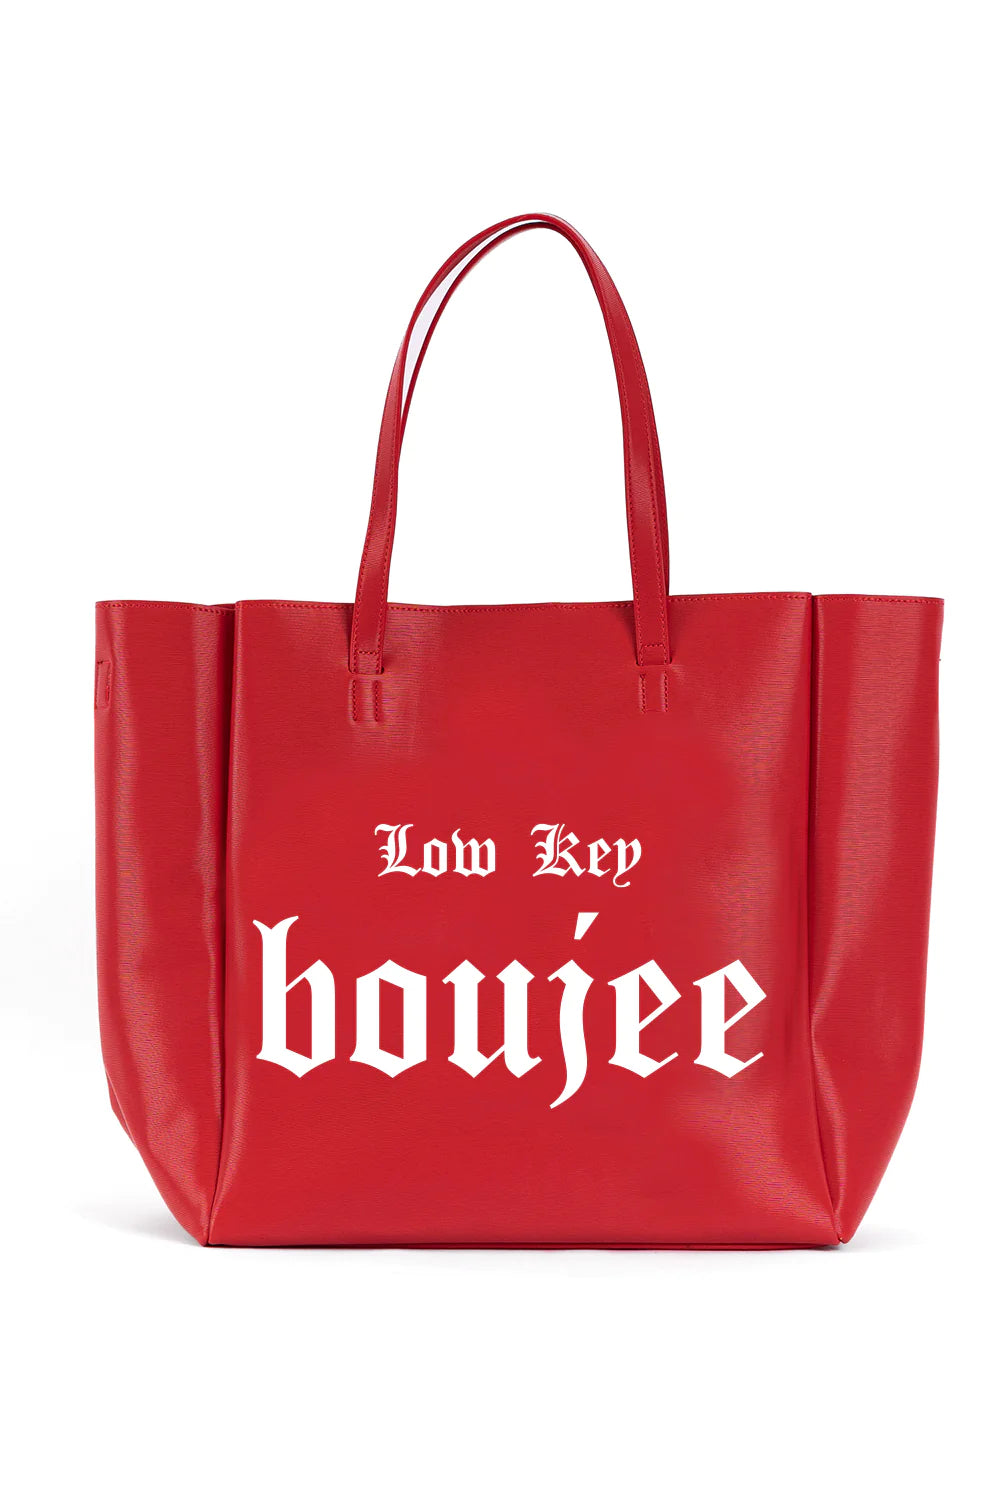 Low Key Boujee Never Full Tote (Red)